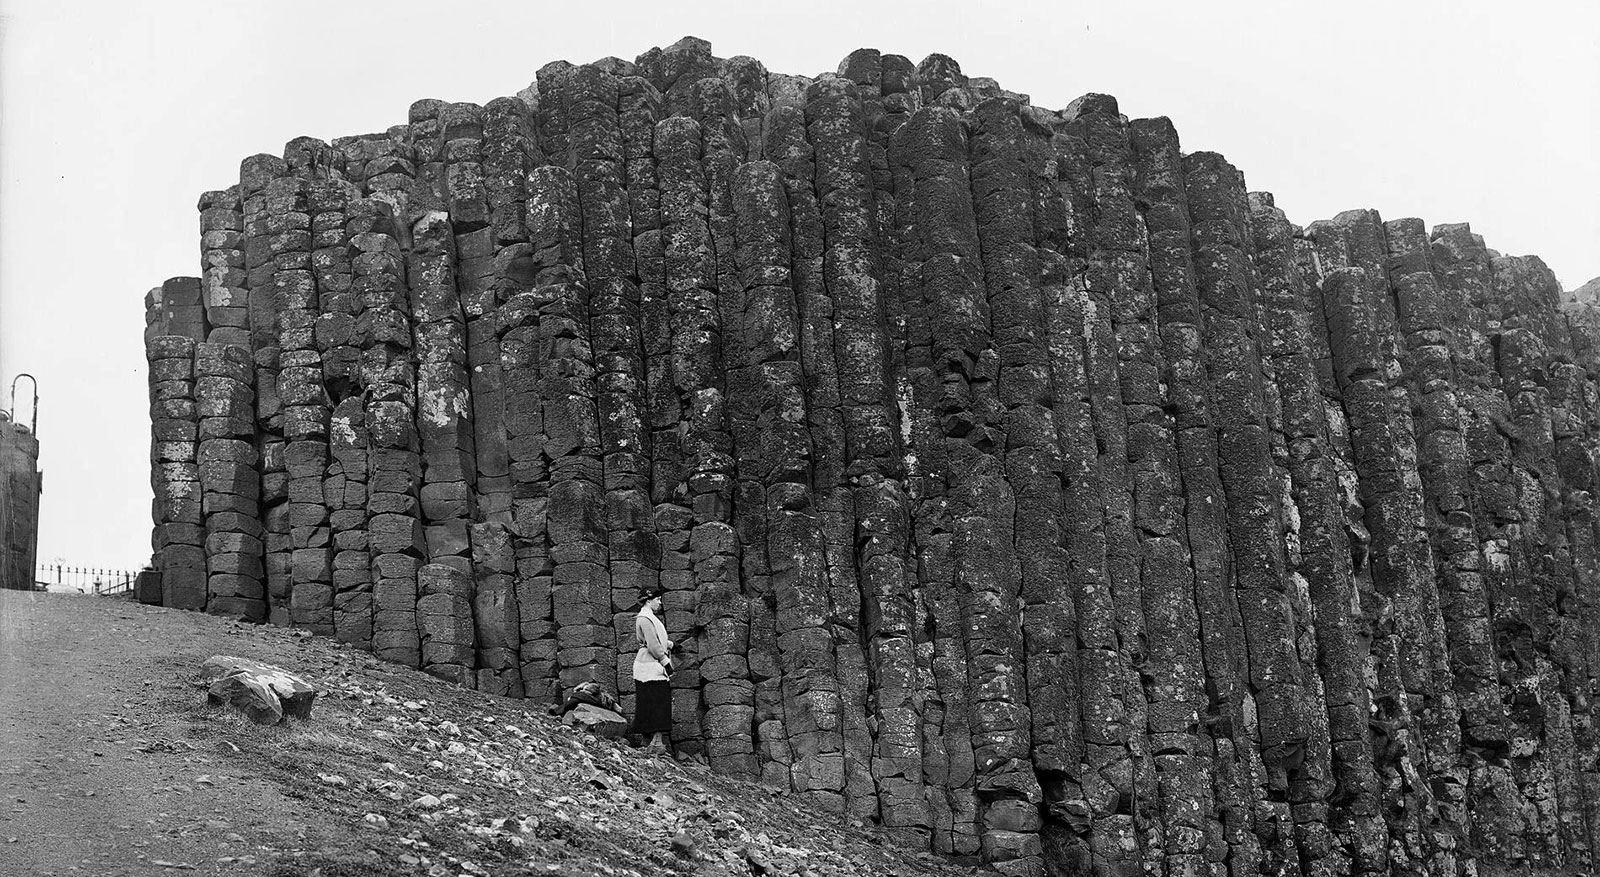 The Giant's Loom at the Giant's Causeway.